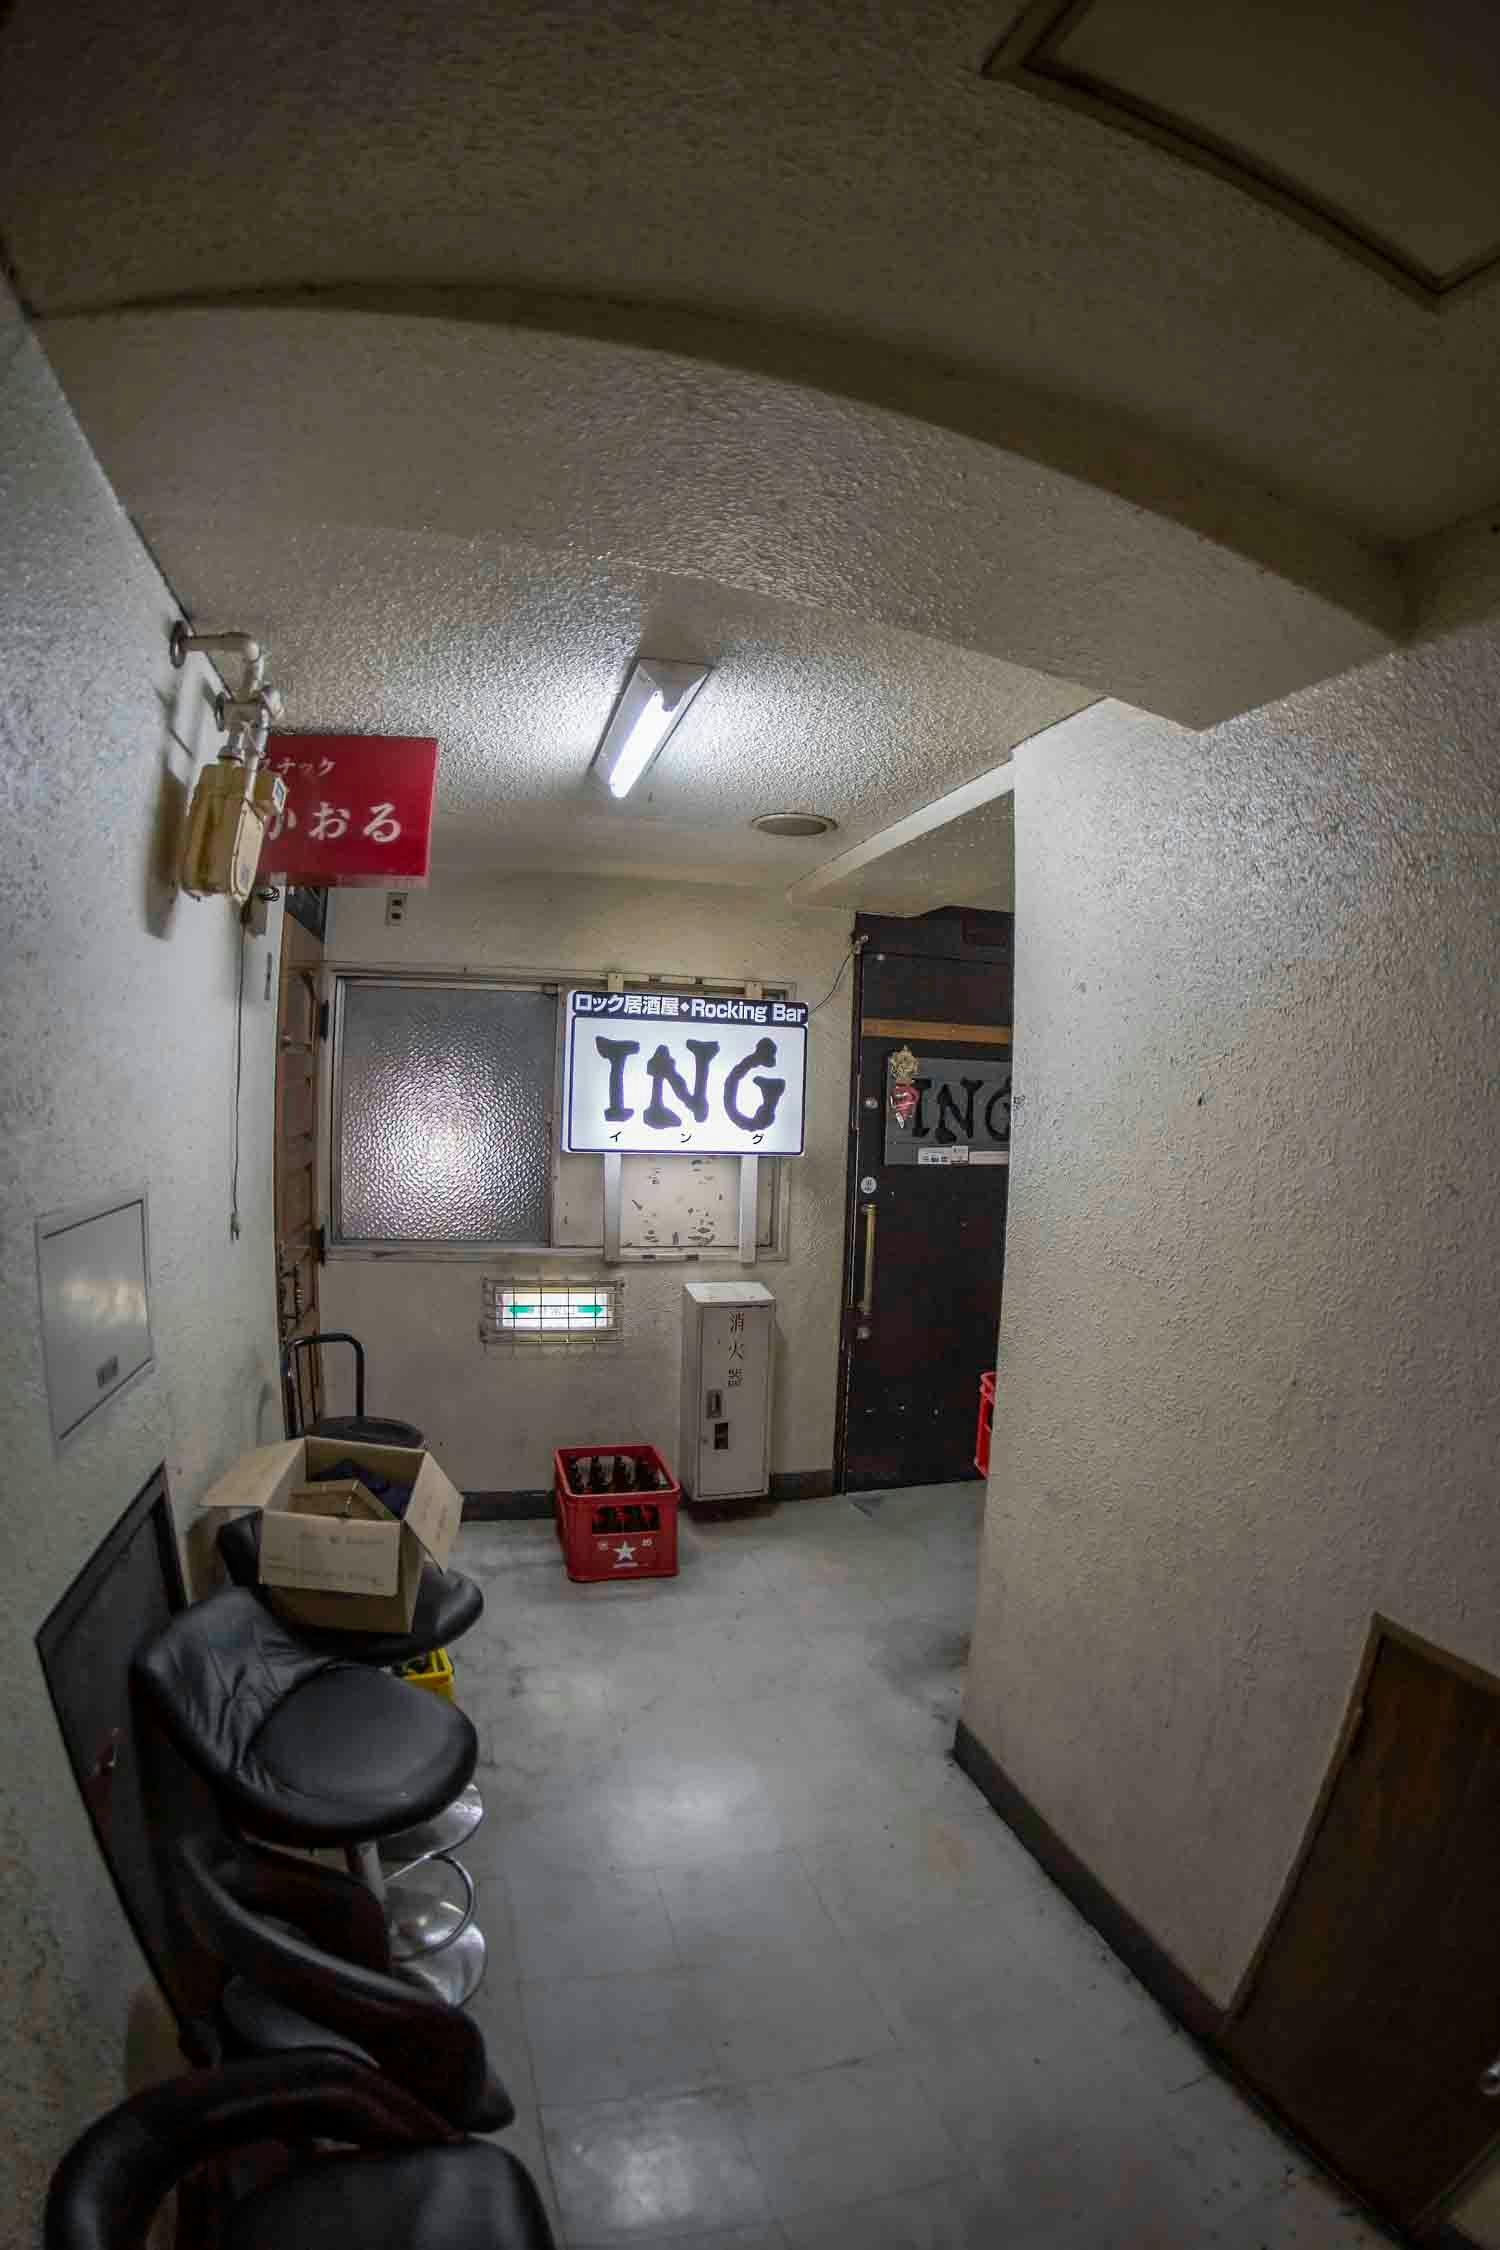 The entrance to Rock Bar ING on the 2nd Floor of the Royal Kyoto Building. Photo source: James Saundrers-Wyndham